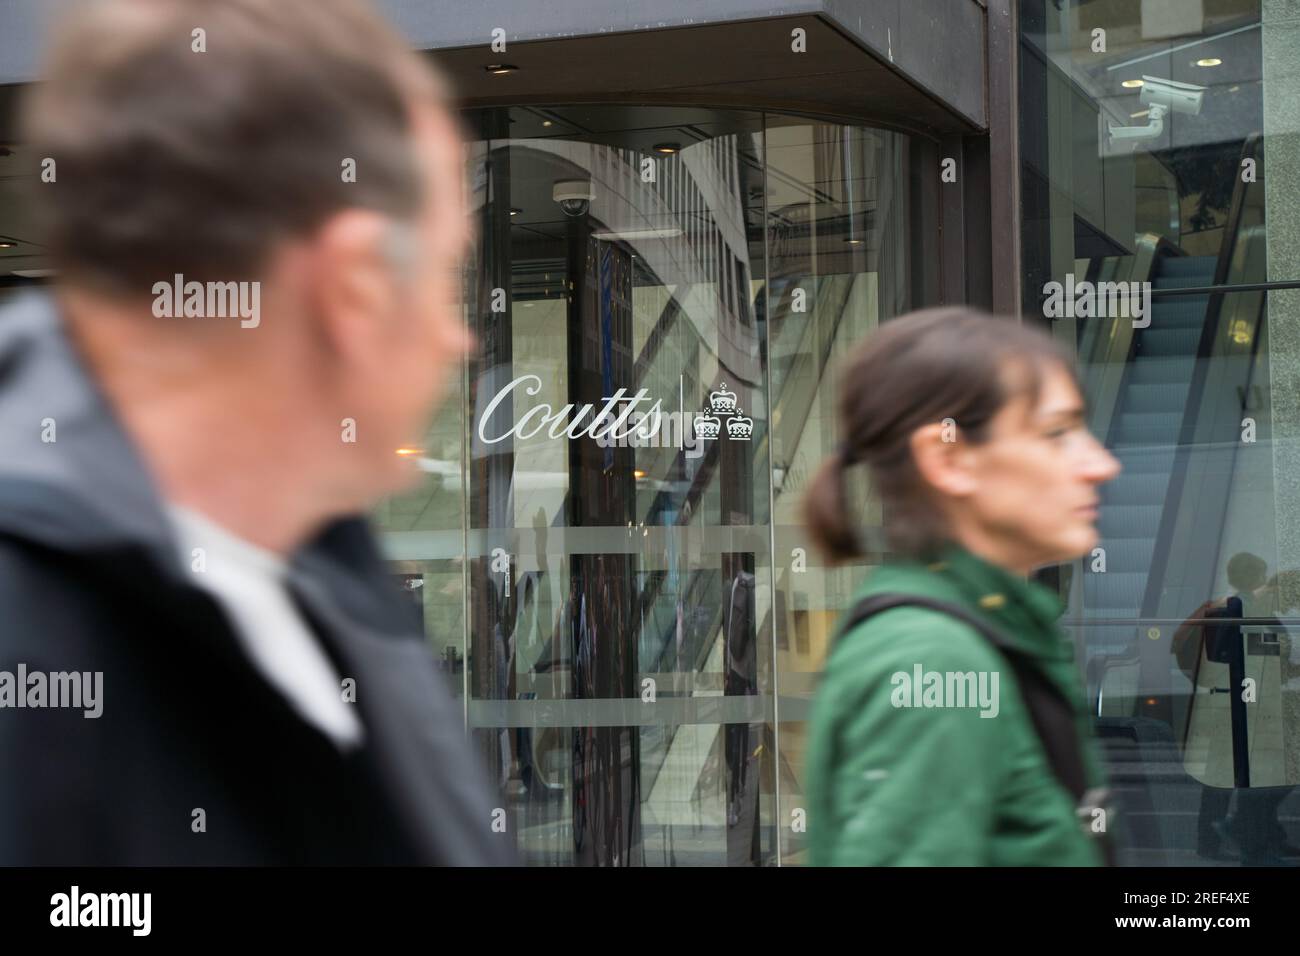 Coutts-Schild am Eingang zur Coutts-Privatbank in Strand London England Stockfoto